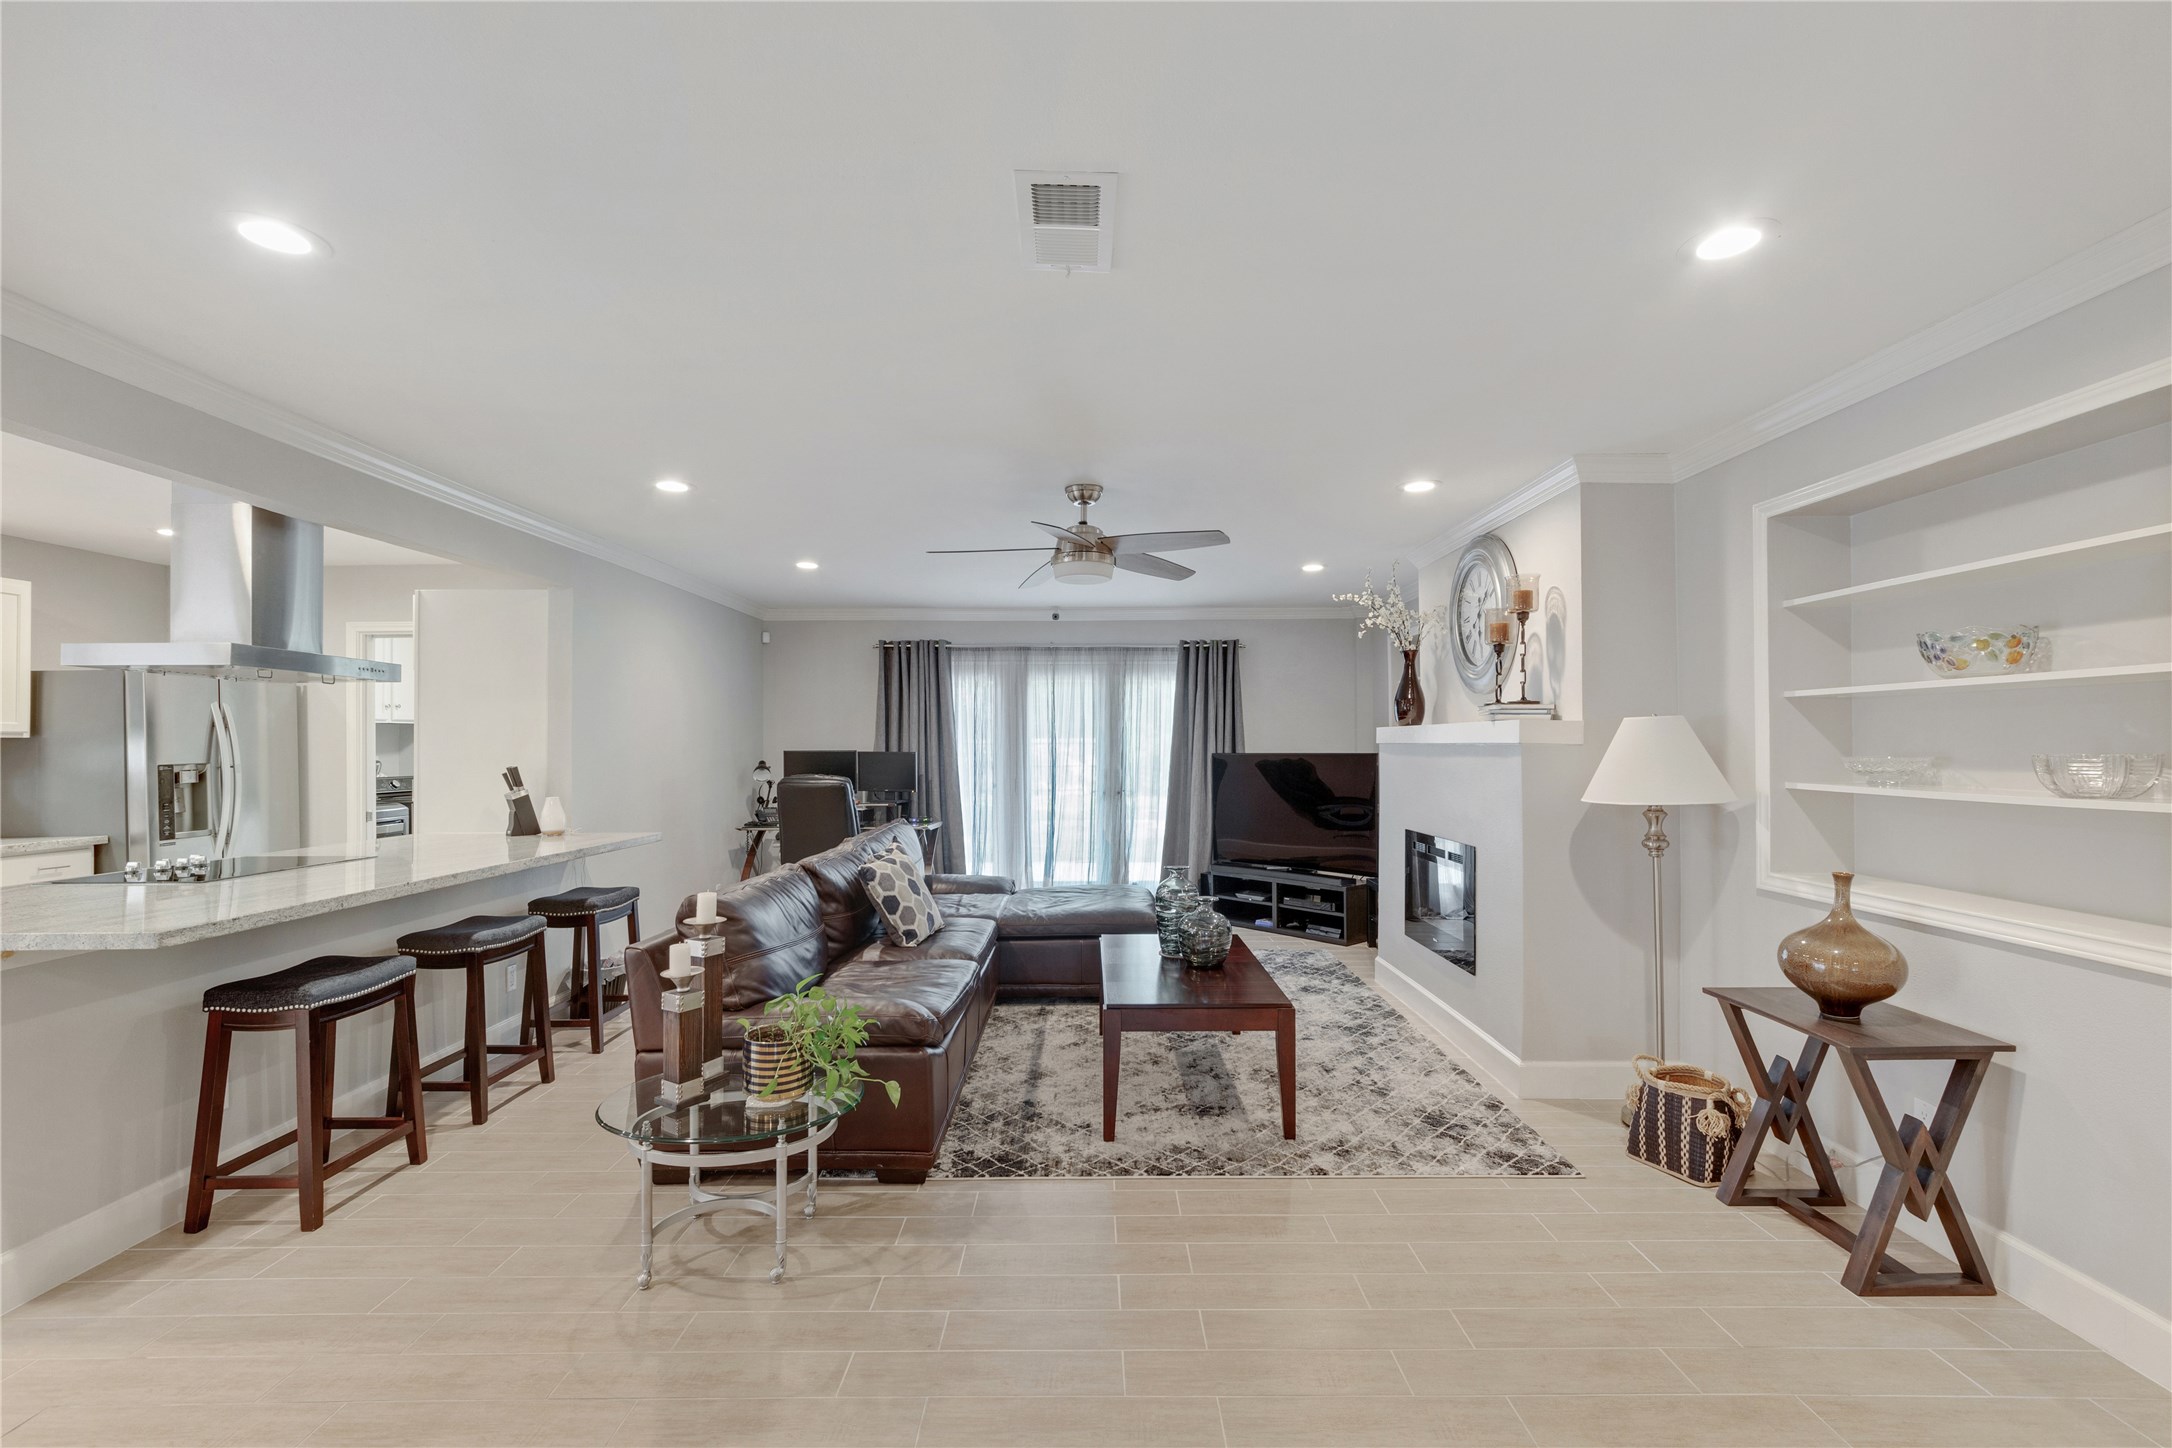 Overlooking the kitchen is the spacious family room with spectacular new fireplace and mantle.  Built in shelving on each side give you ample space for displays.